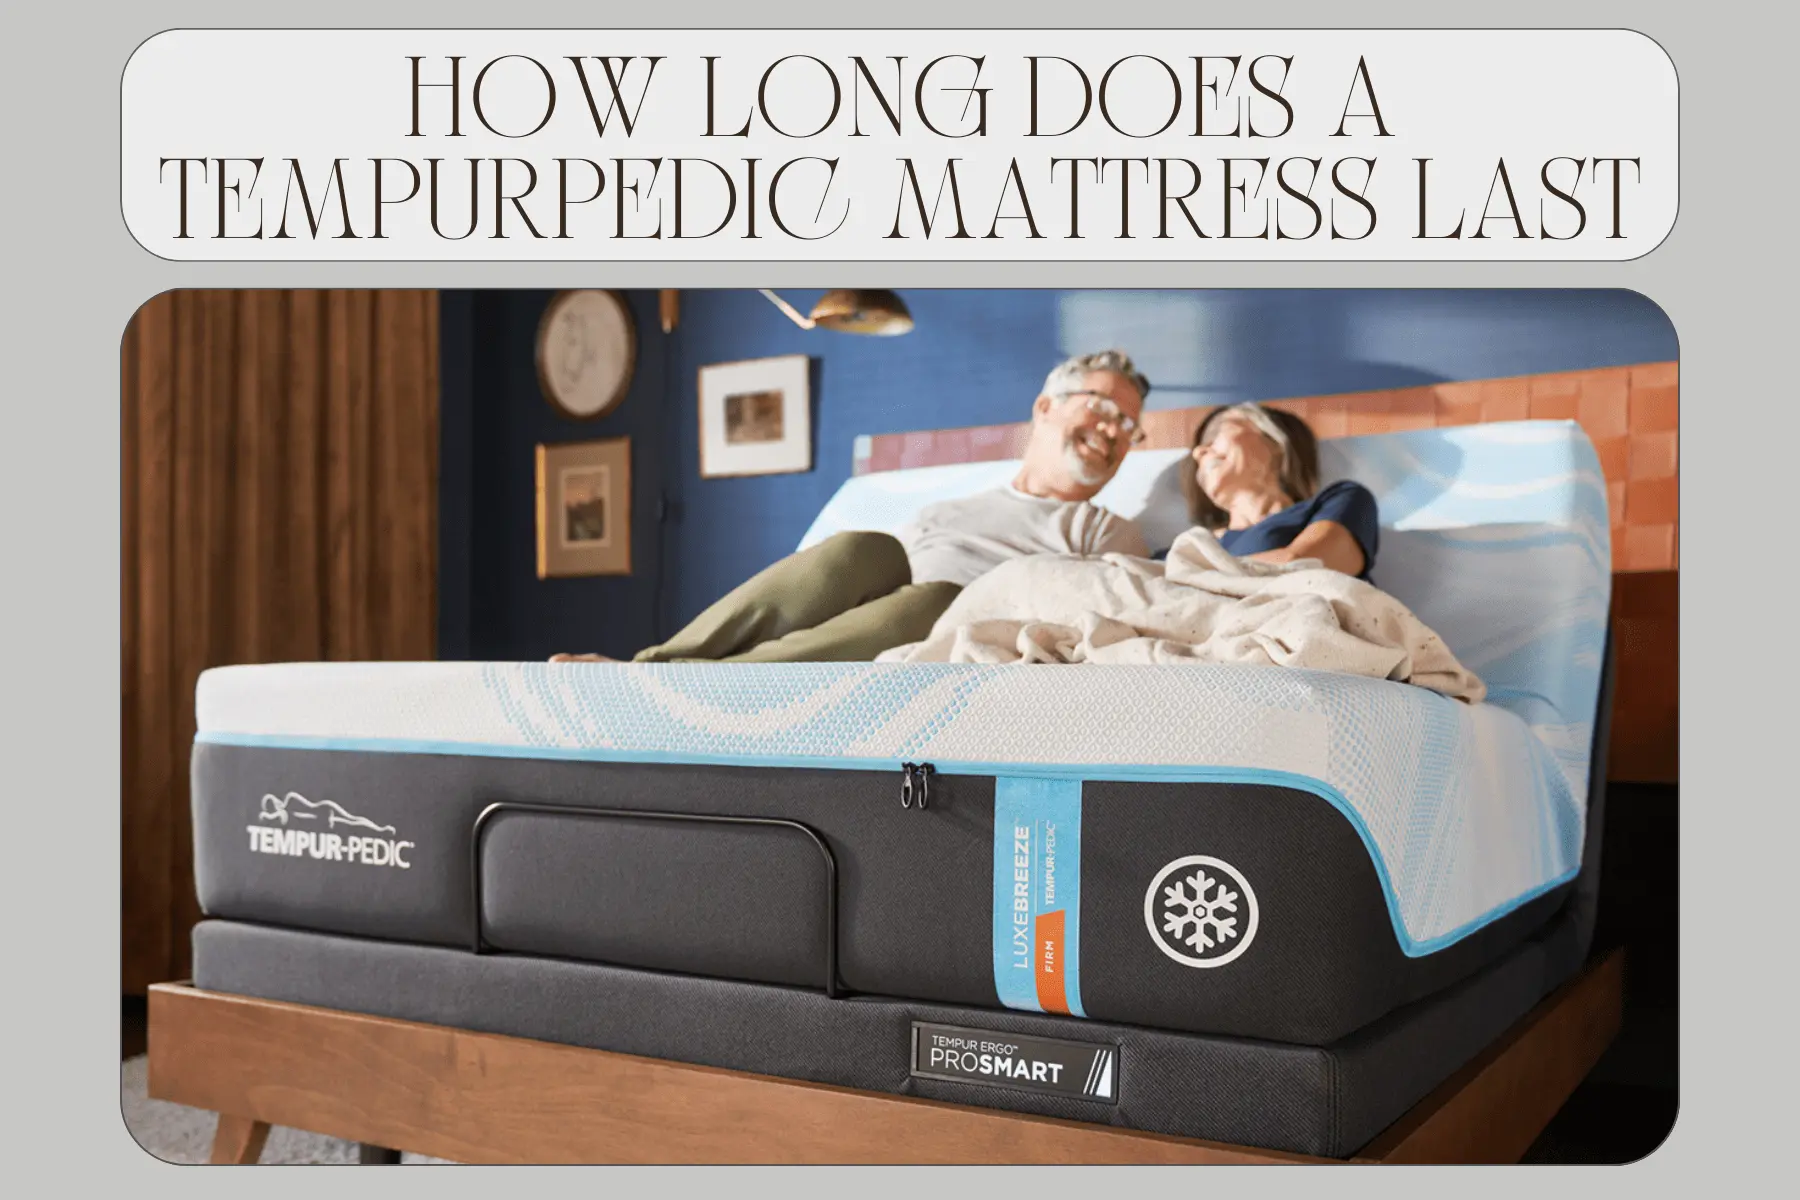 The Ultimate Guide: How long does a Tempurpedic mattress last?